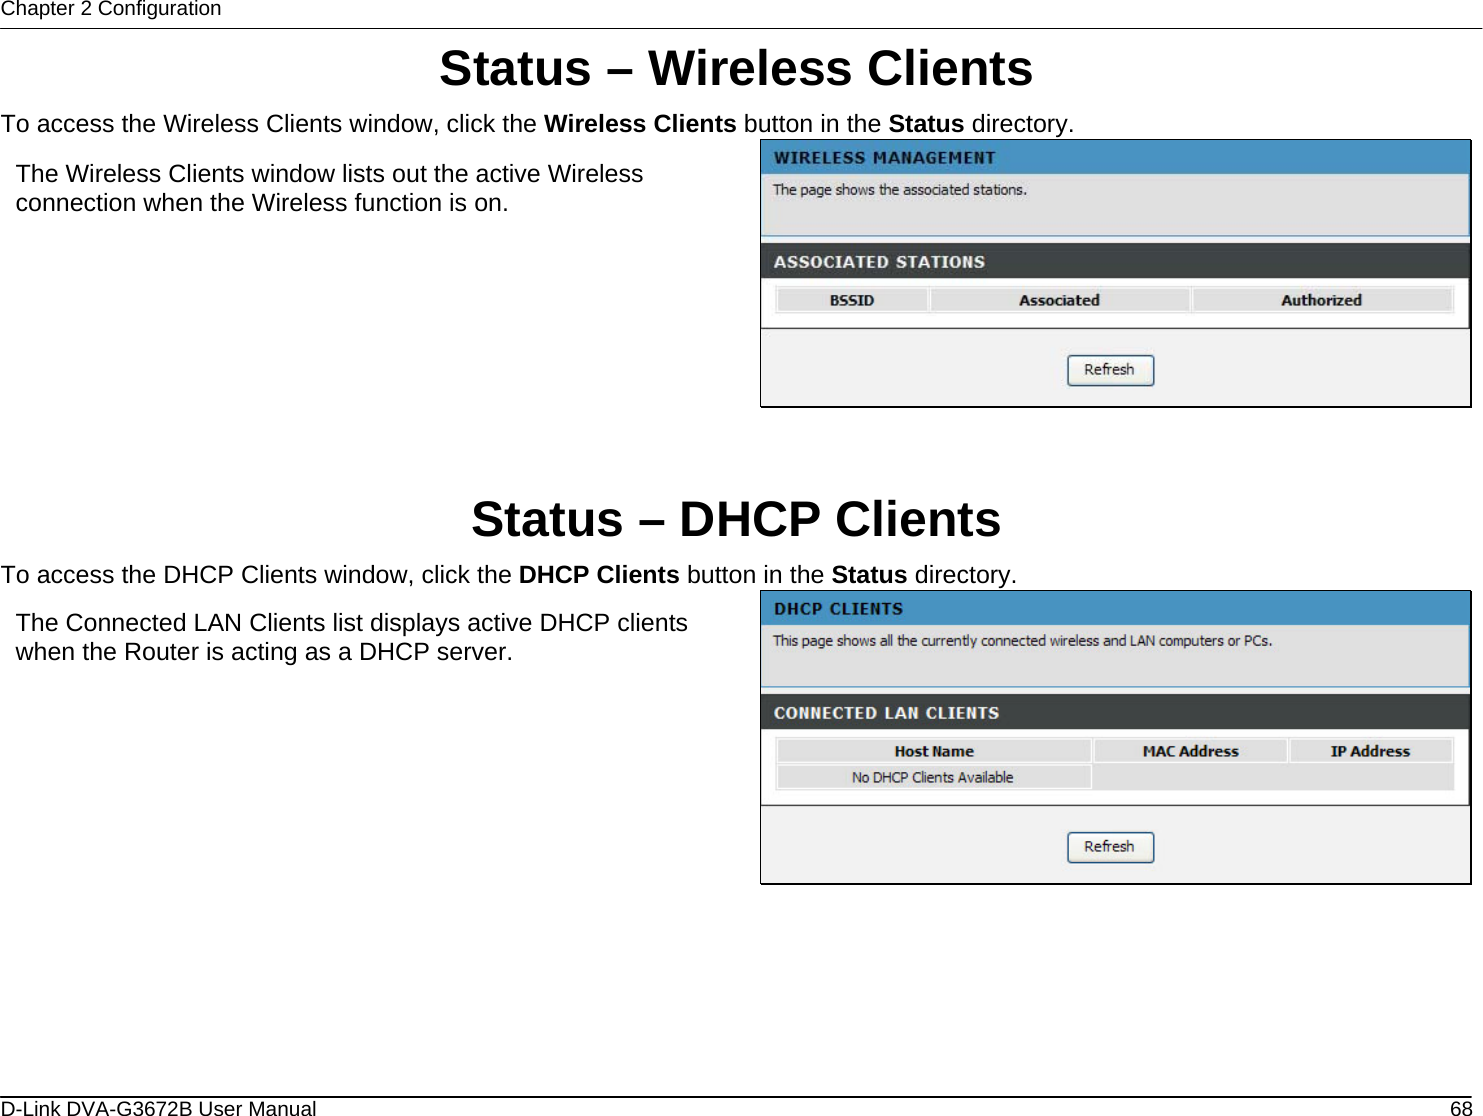 Chapter 2 Configuration Status – Wireless Clients To access the Wireless Clients window, click the Wireless Clients button in the Status directory.  The Wireless Clients window lists out the active Wireless connection when the Wireless function is on.   Status – DHCP Clients To access the DHCP Clients window, click the DHCP Clients button in the Status directory.  The Connected LAN Clients list displays active DHCP clients when the Router is acting as a DHCP server.       D-Link DVA-G3672B User Manual  68